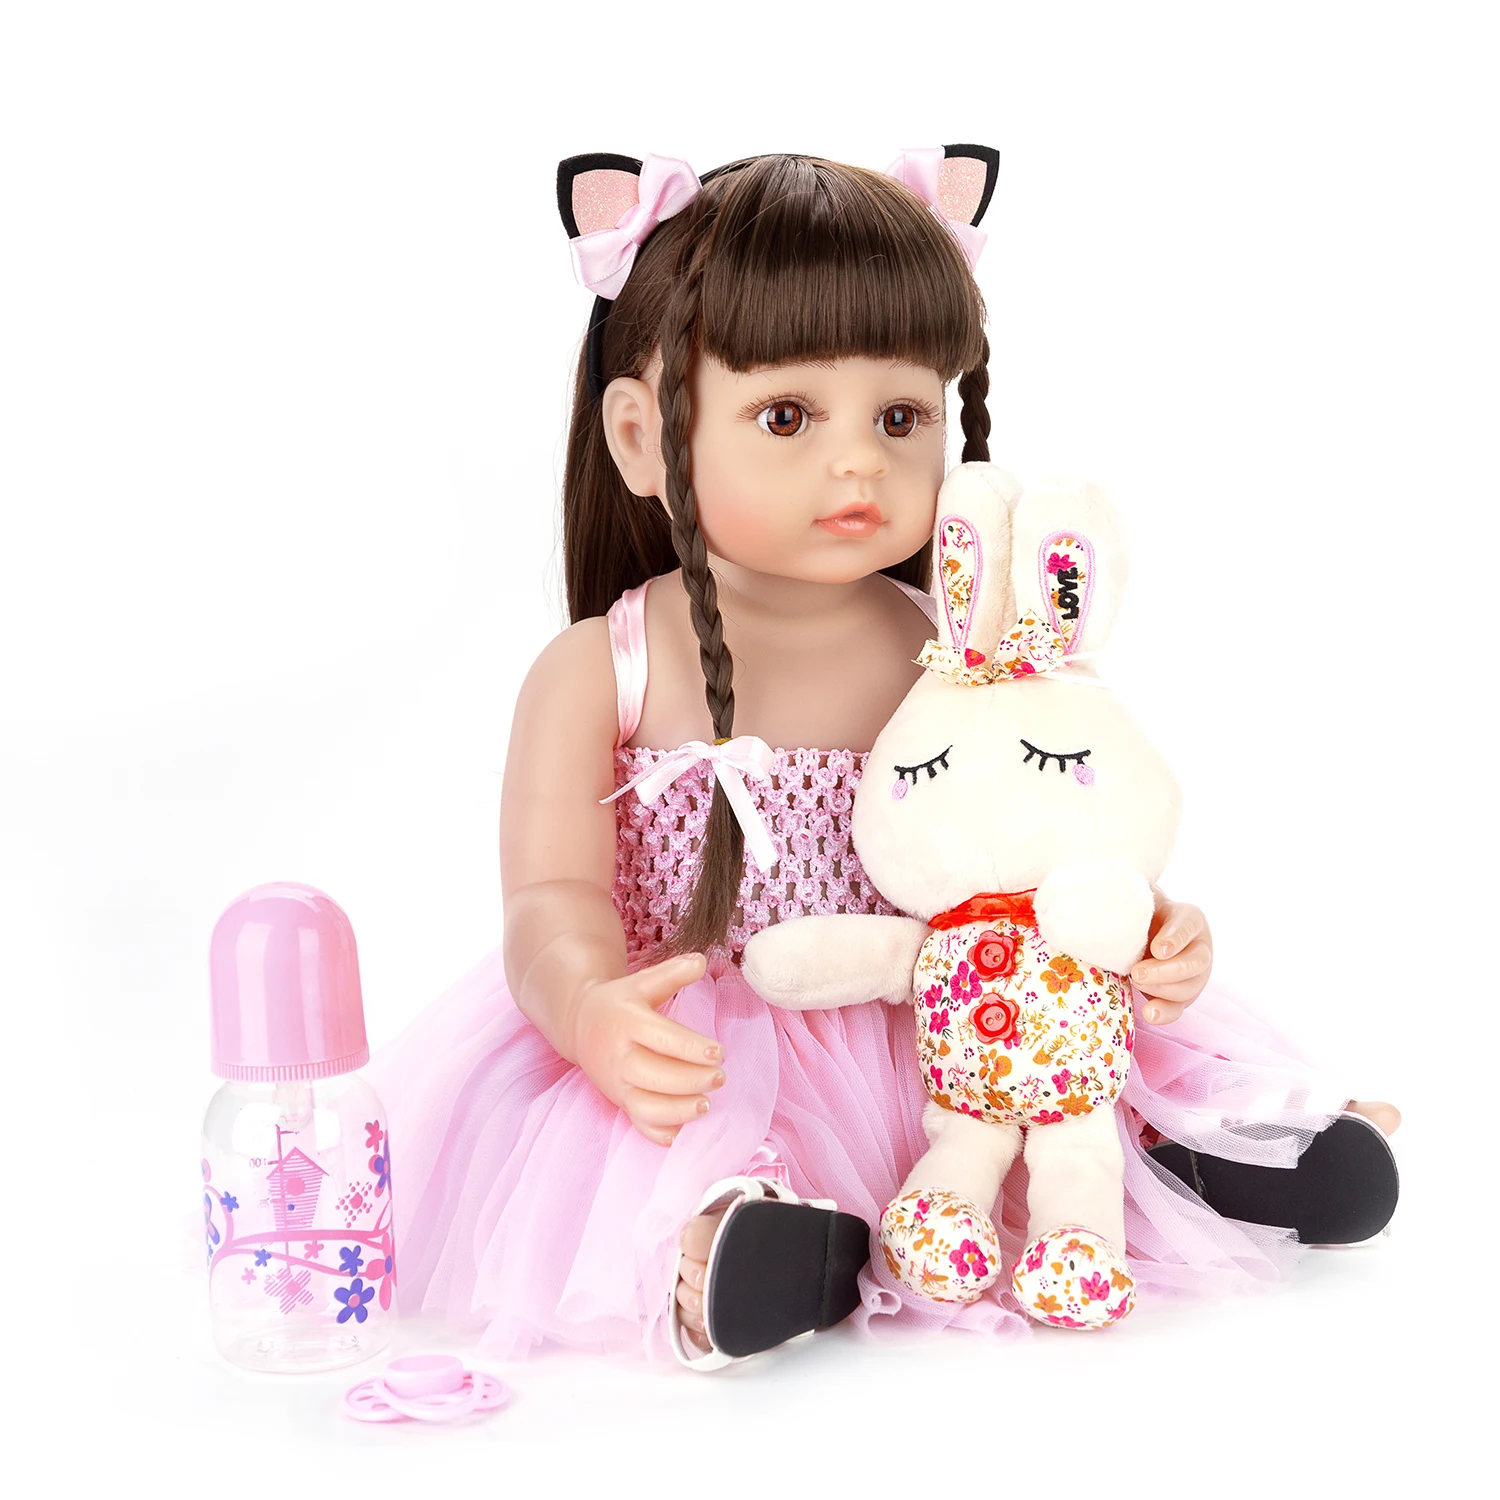 Baby Doll with pacifier and baby bottle Girl Kids Toddler Cute Plush Soft Gift 